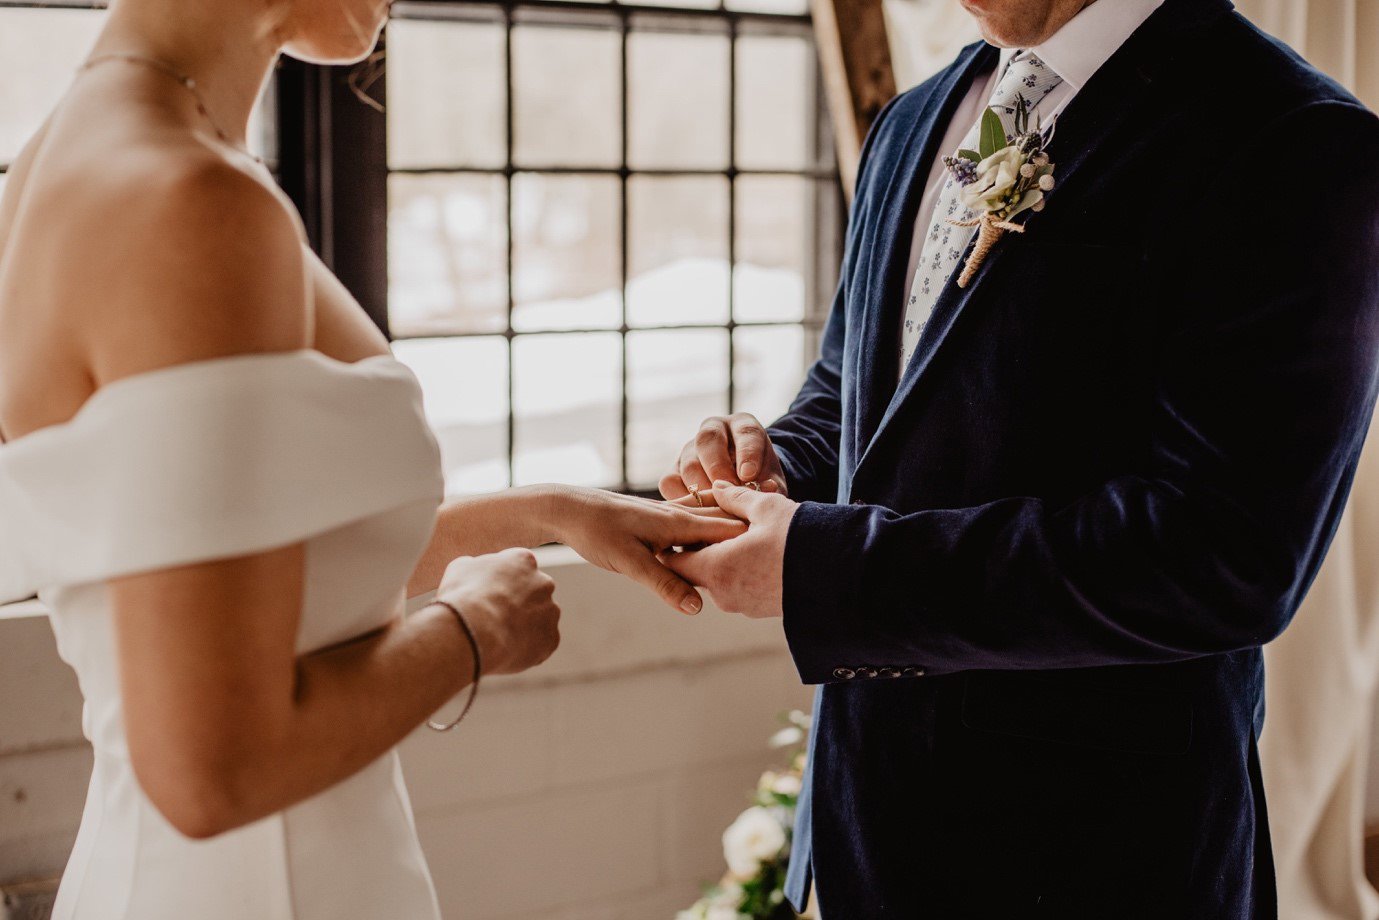 A couple getting married. The man is placing a ring on the woman's finger